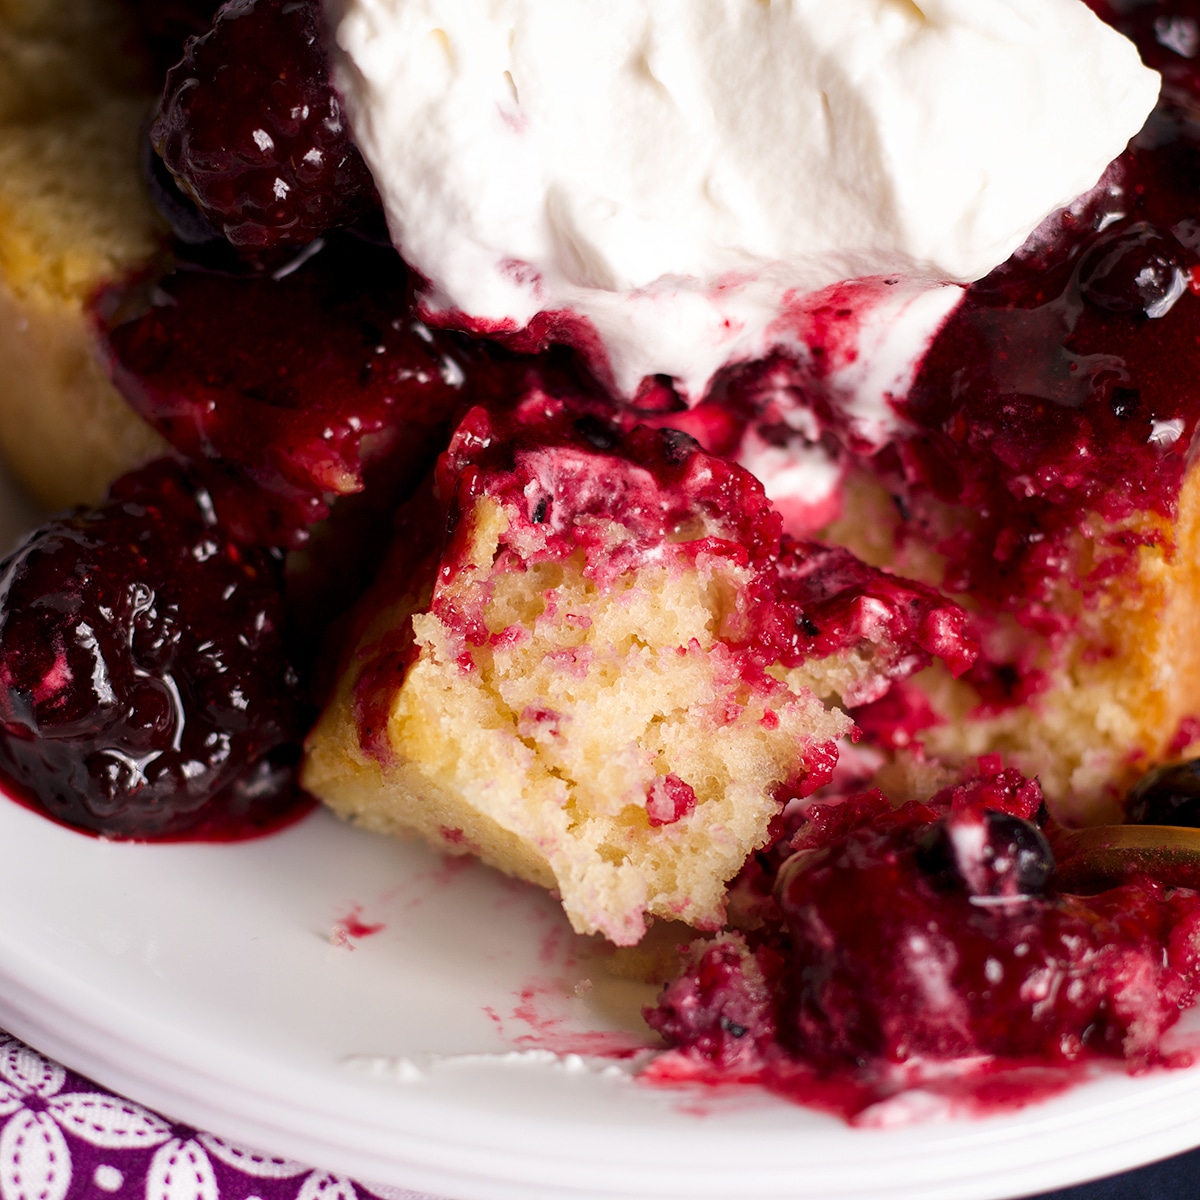 Someone using a fork to cut a bite of vanilla loaf cake covered in berry sauce.